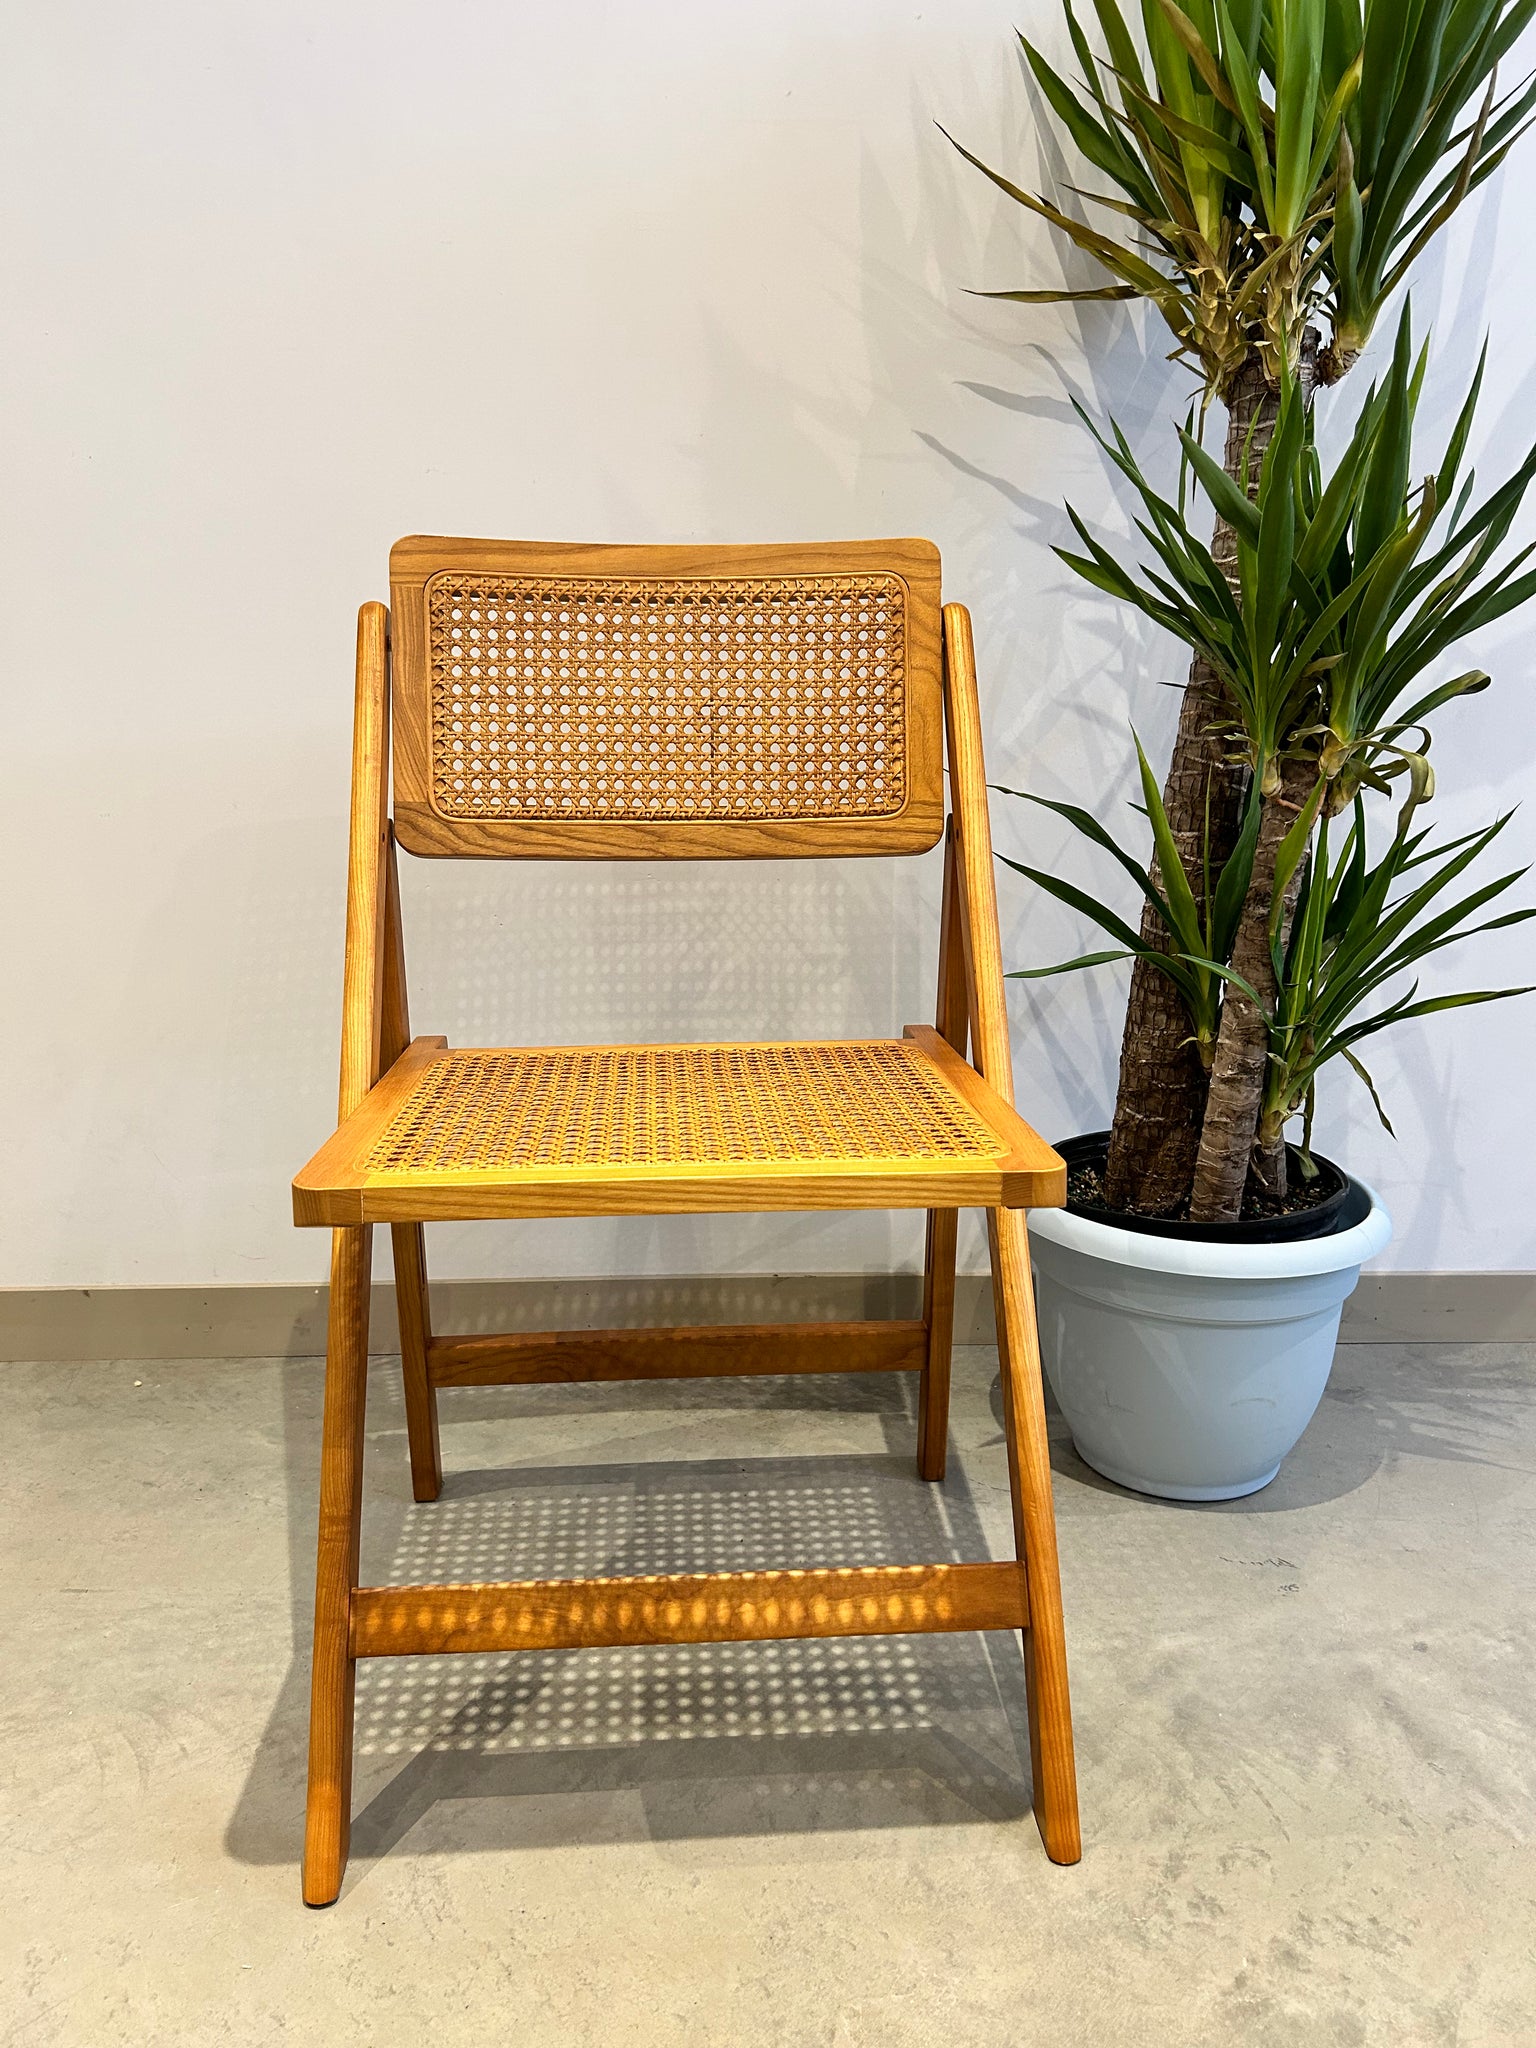 Vintage style wood & rattan folding chairs